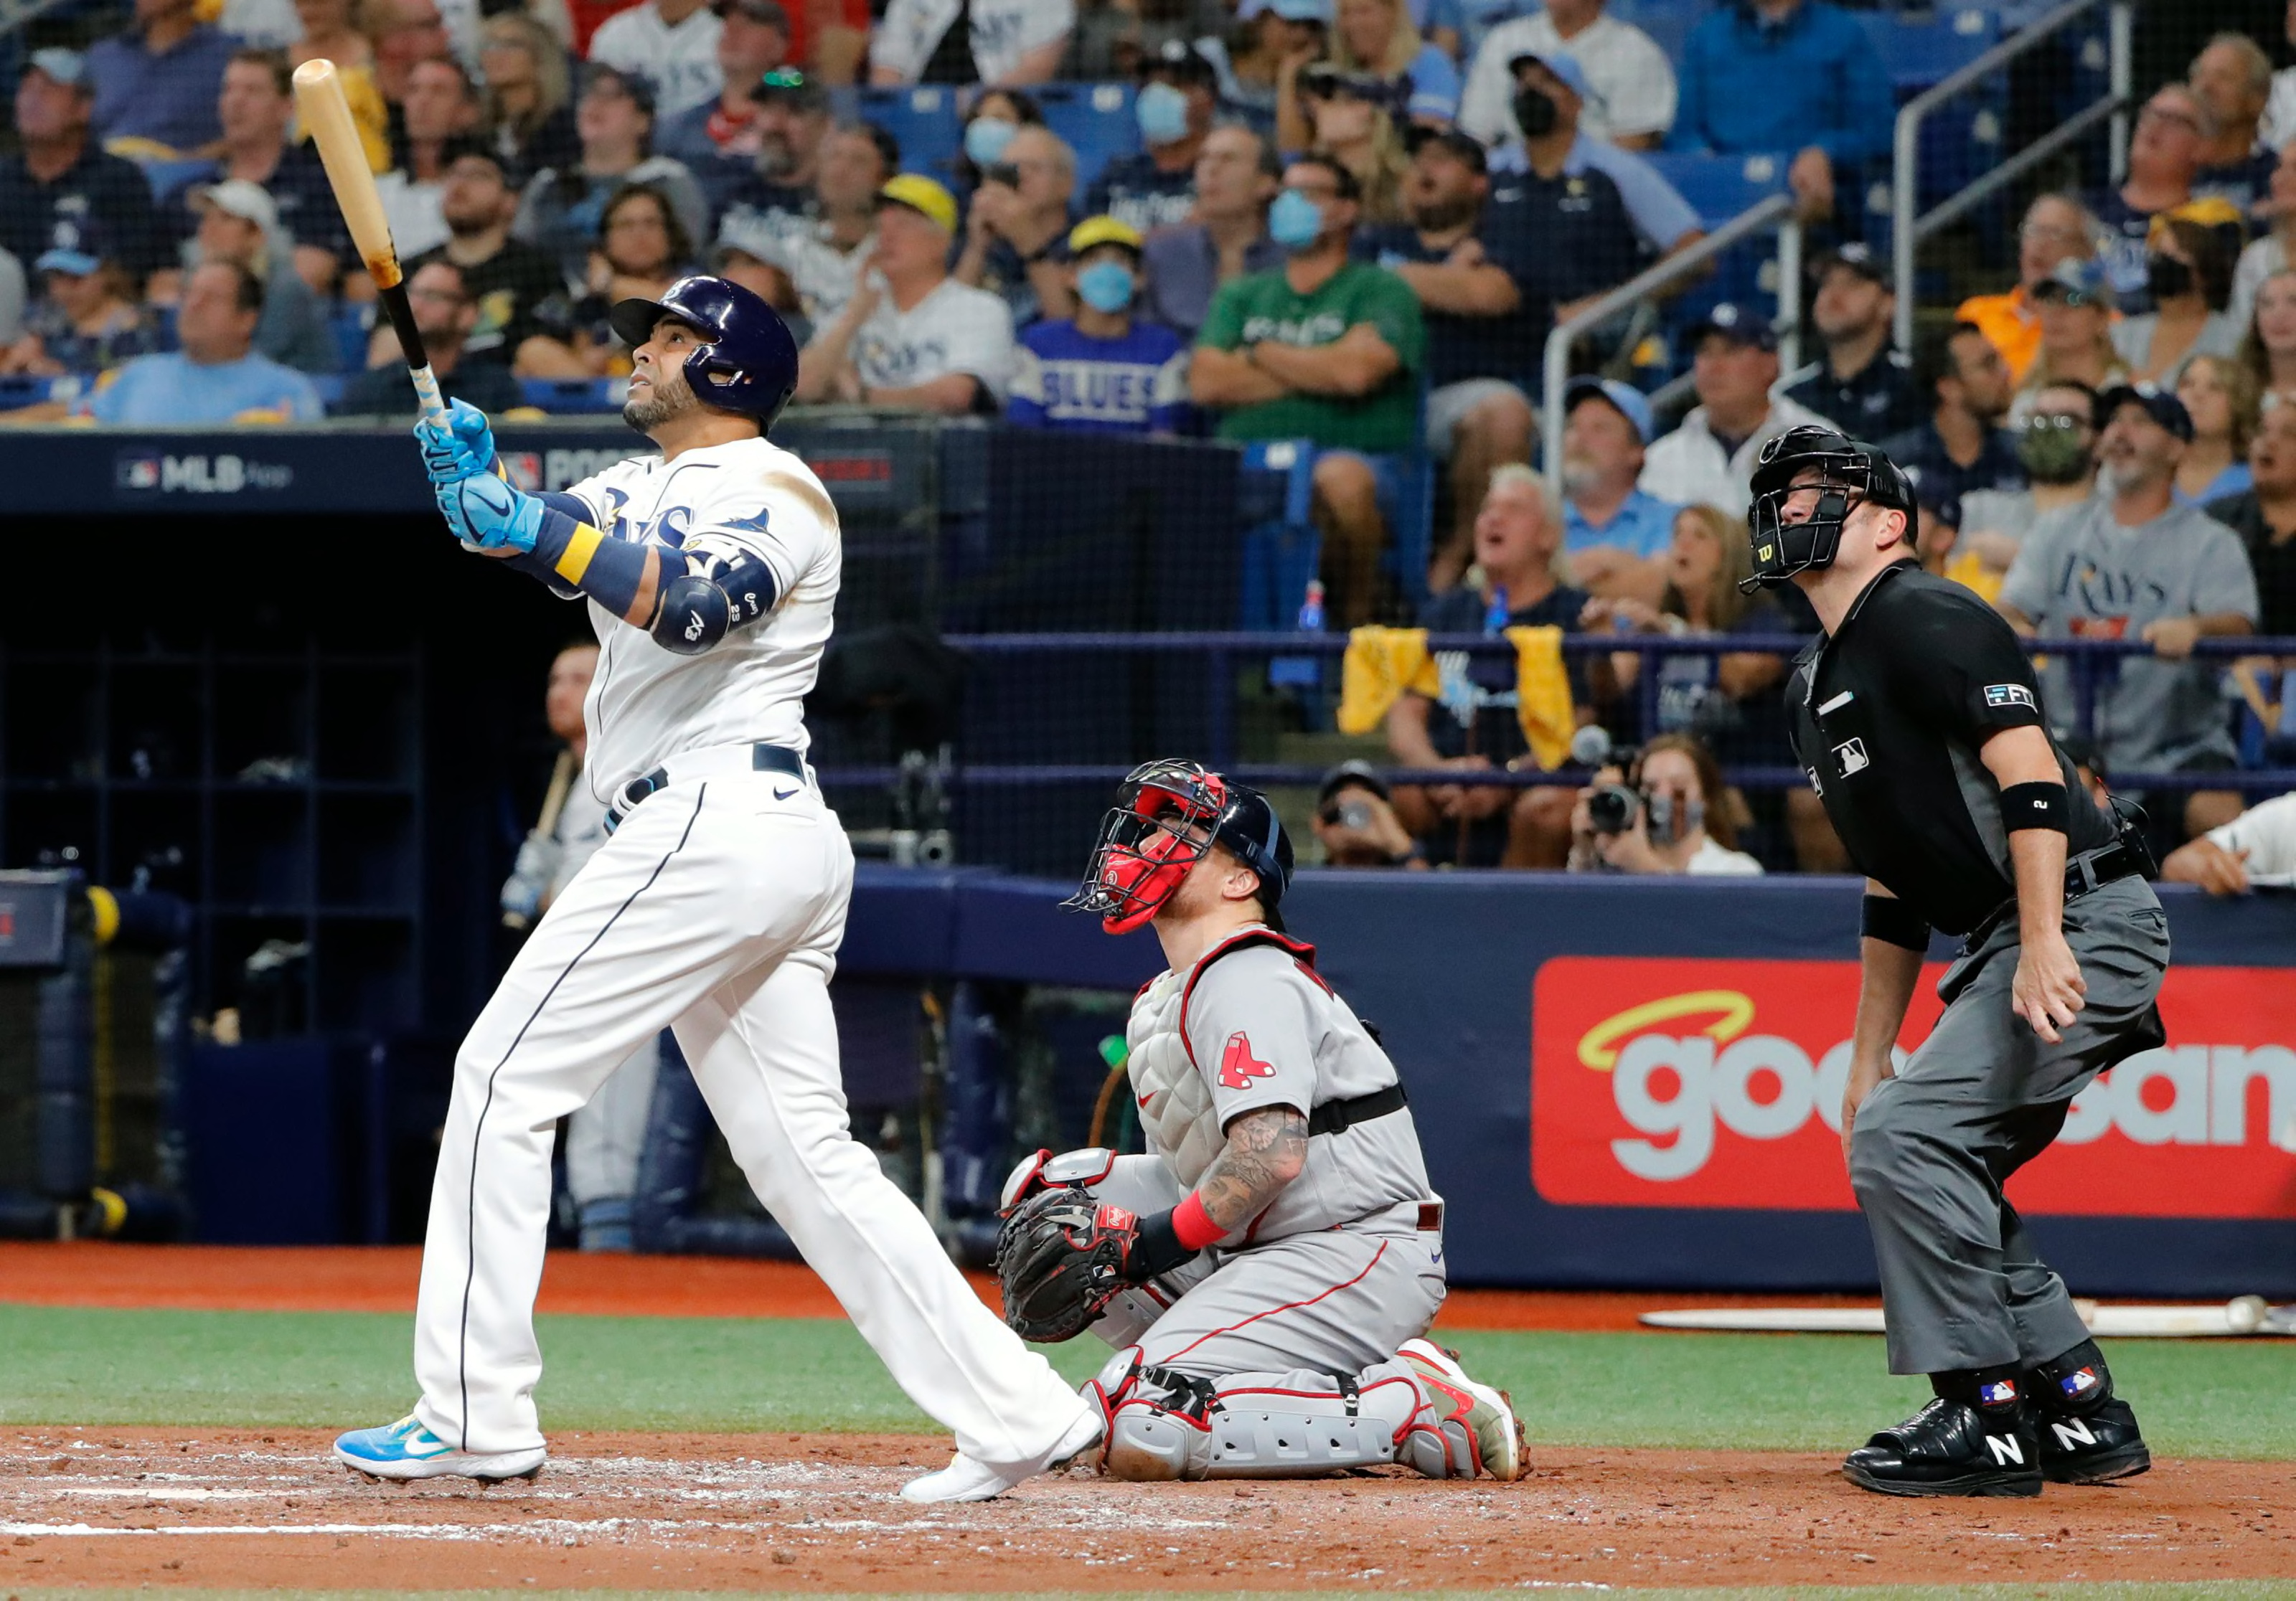 Rays acquire slugger Nelson Cruz from Minnesota for minor leaguers